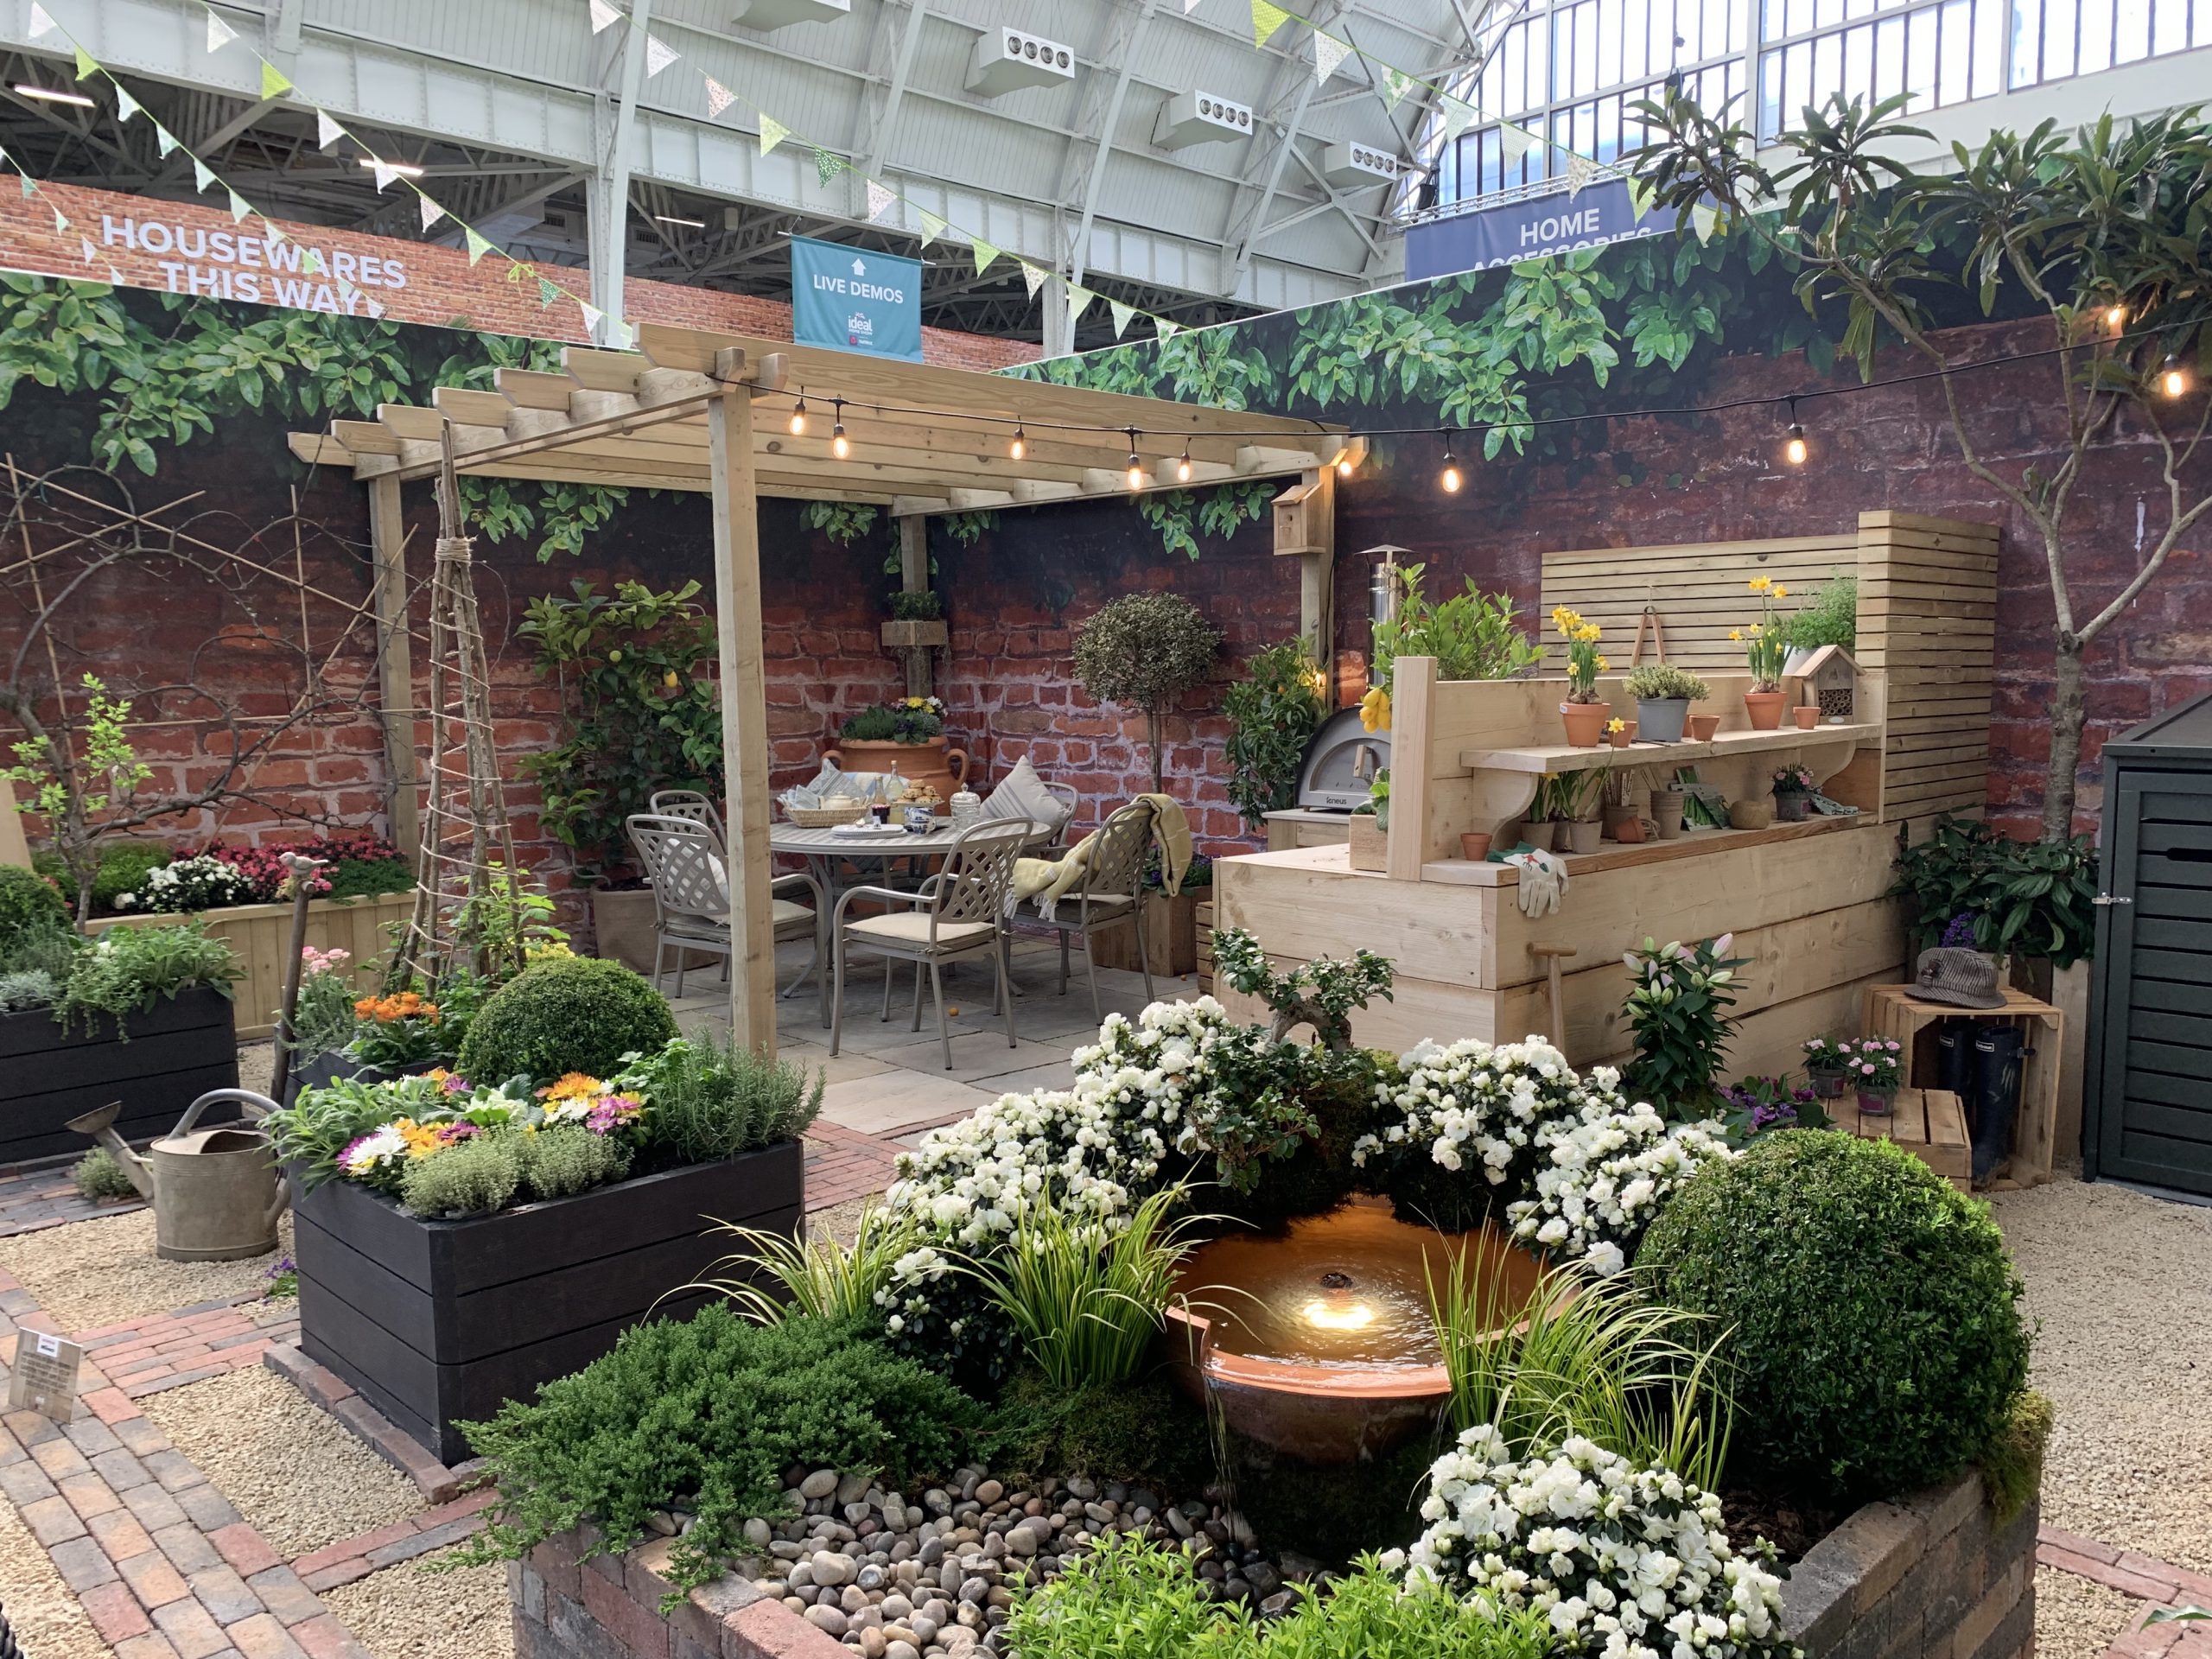 Outdoor cooking and dining at the Ideal Home show